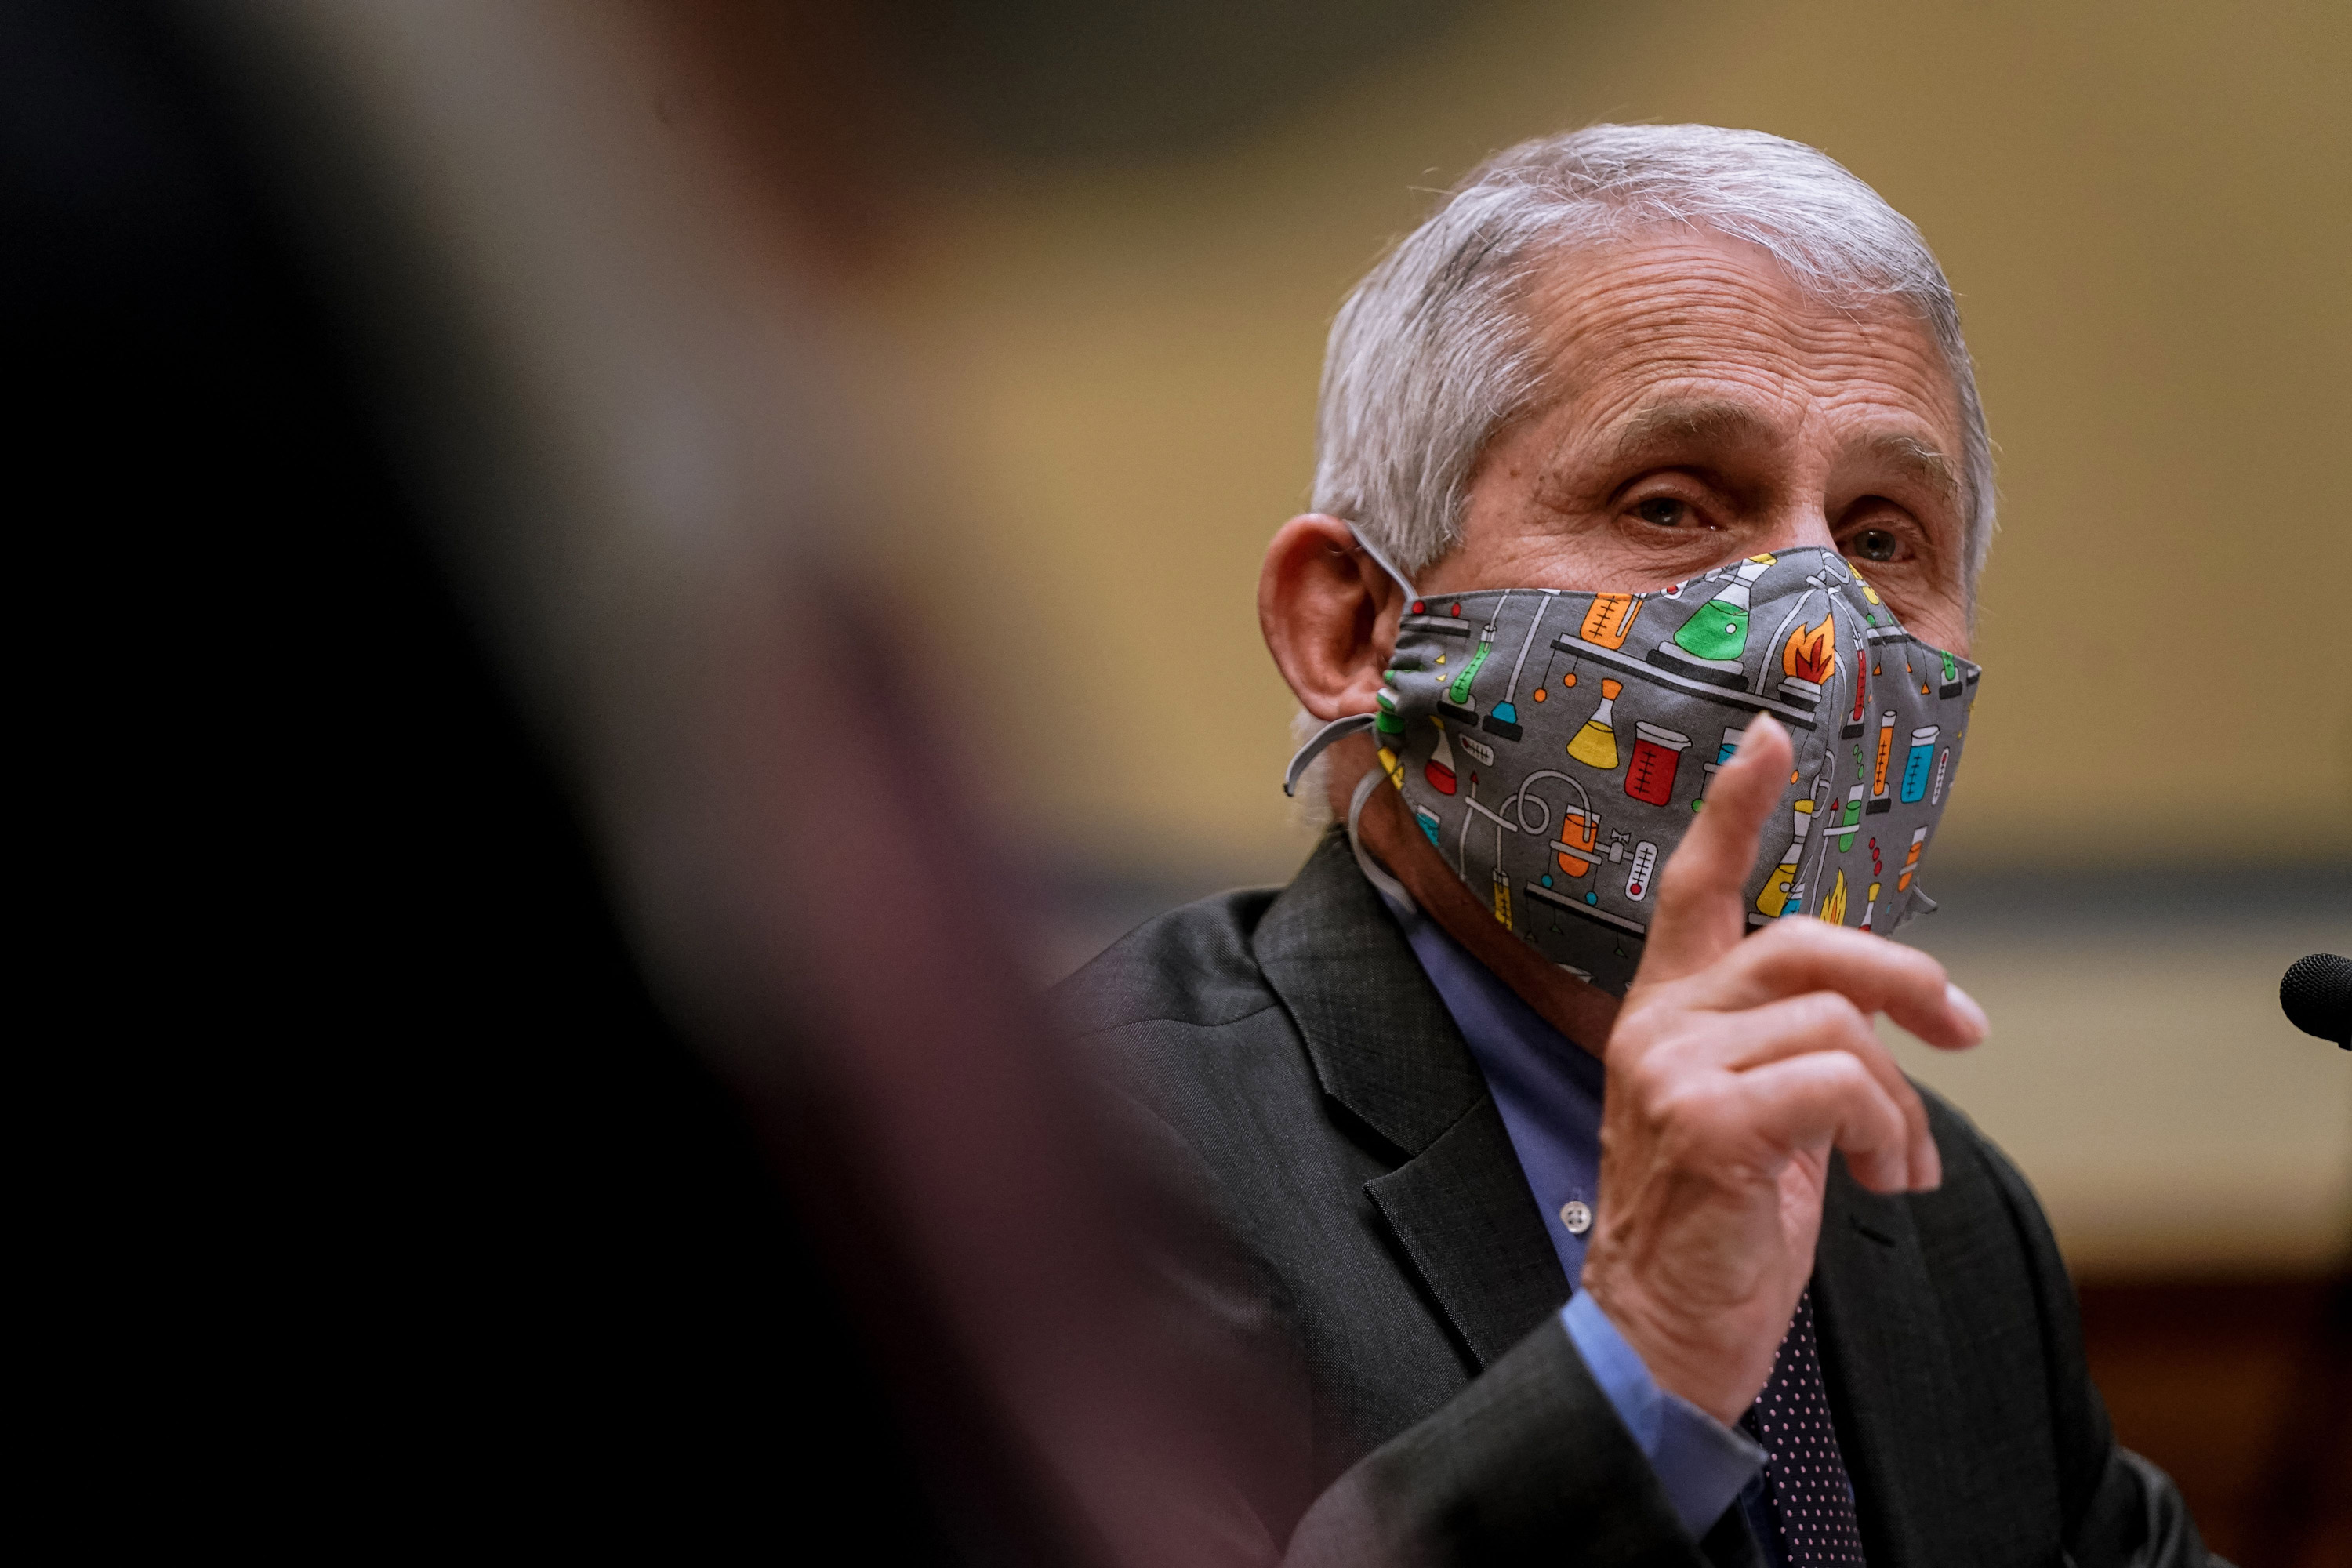 National Institute of Allergy and Infectious Diseases Director Anthony Fauci testifies before a House Select Subcommittee hearing on Capitol Hill in Washington, DC, on April 15.